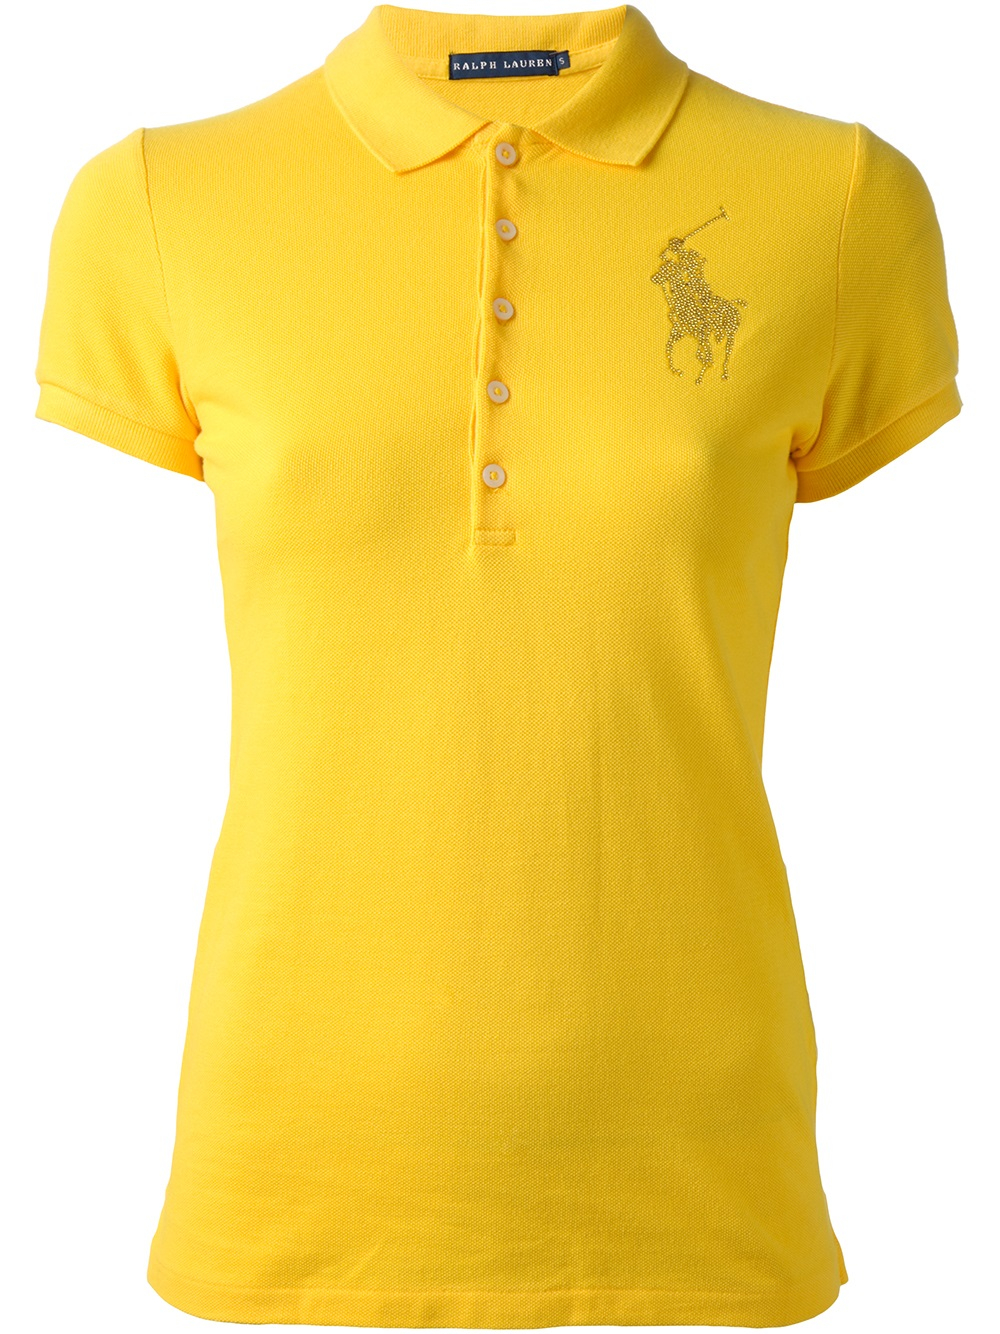 List polo ralph lauren t shirts yellow style opinion magazines, Game of thrones daddy t shirt, sport t shirt med eget tryck. 